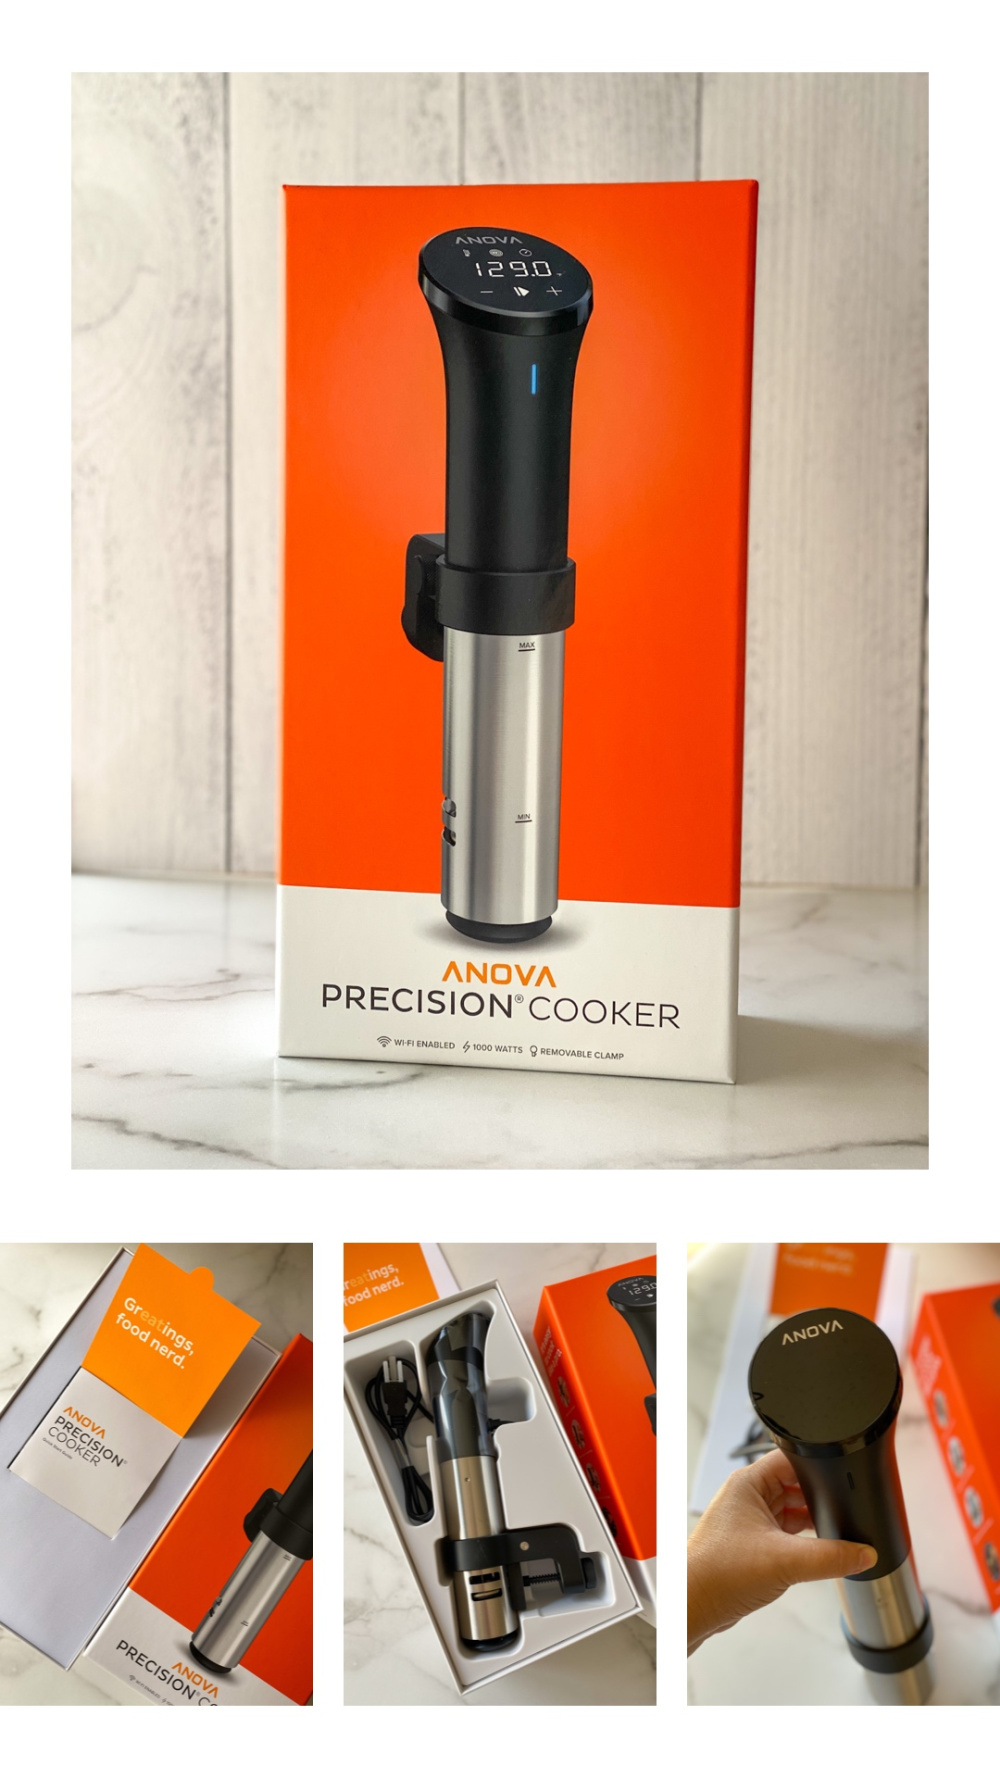 This is the Anova precision cooker 